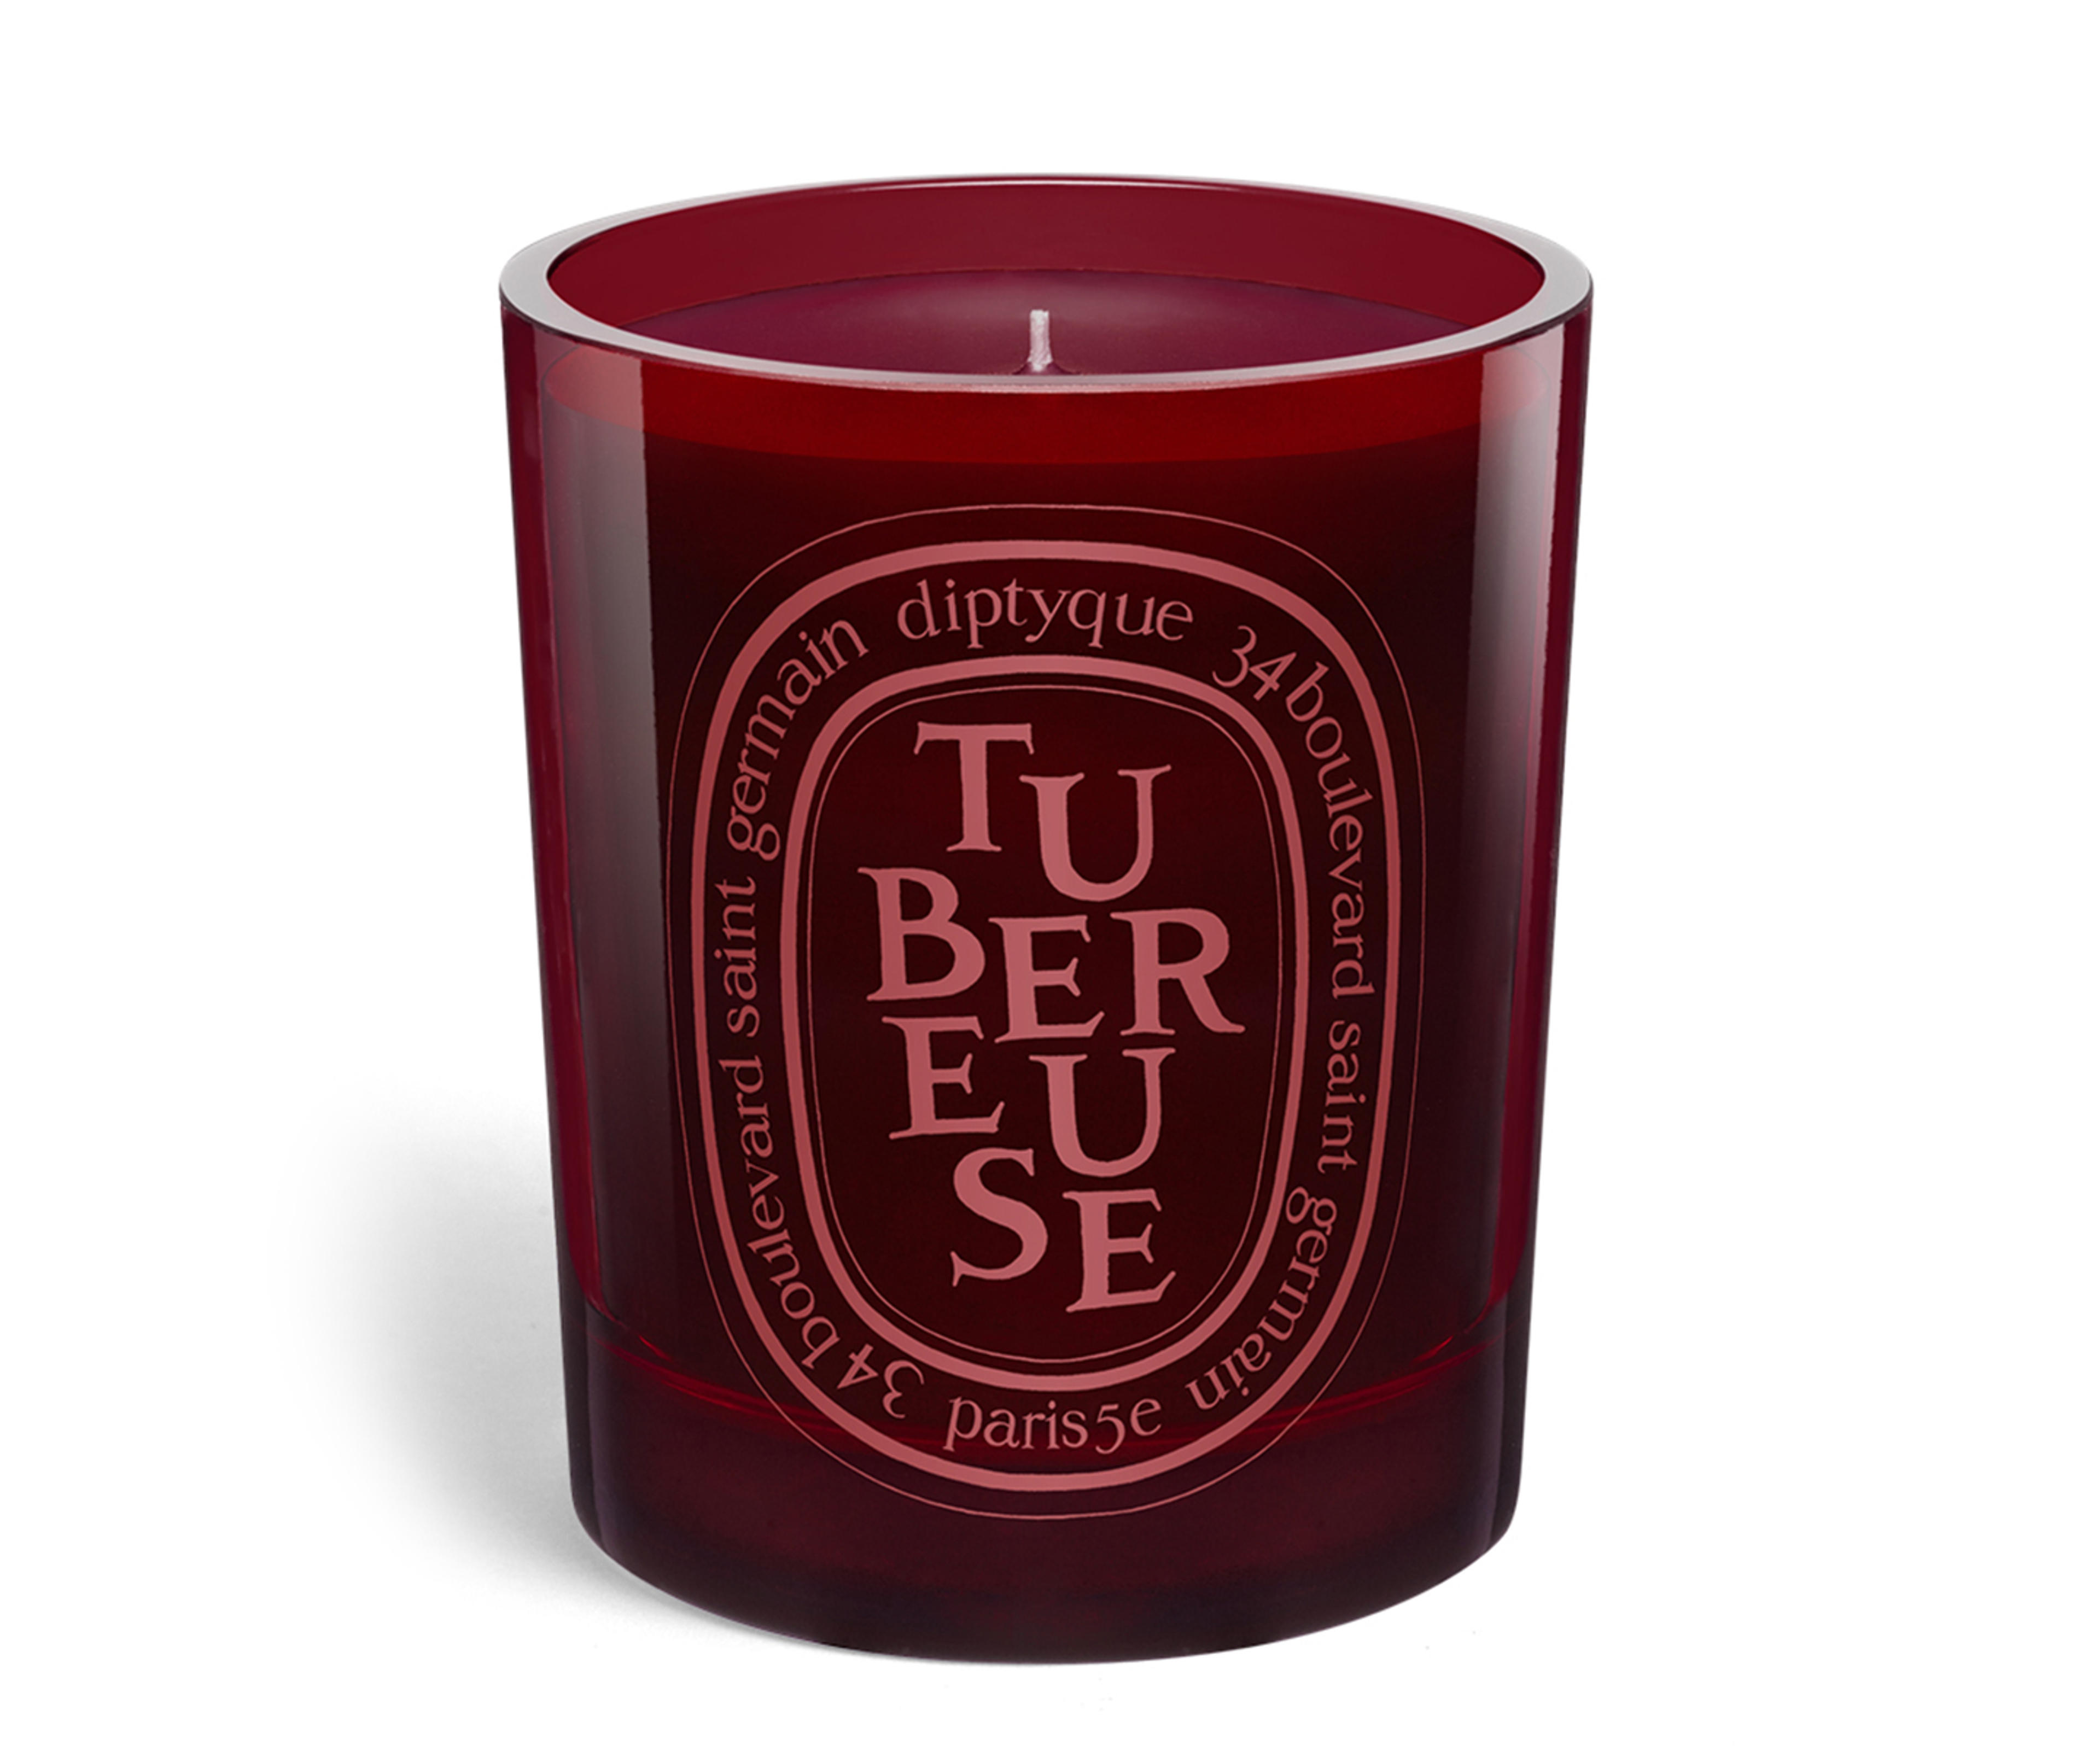 Tubéreuse (Tuberose) candle 300g - Colored scented candles | Diptyque Paris